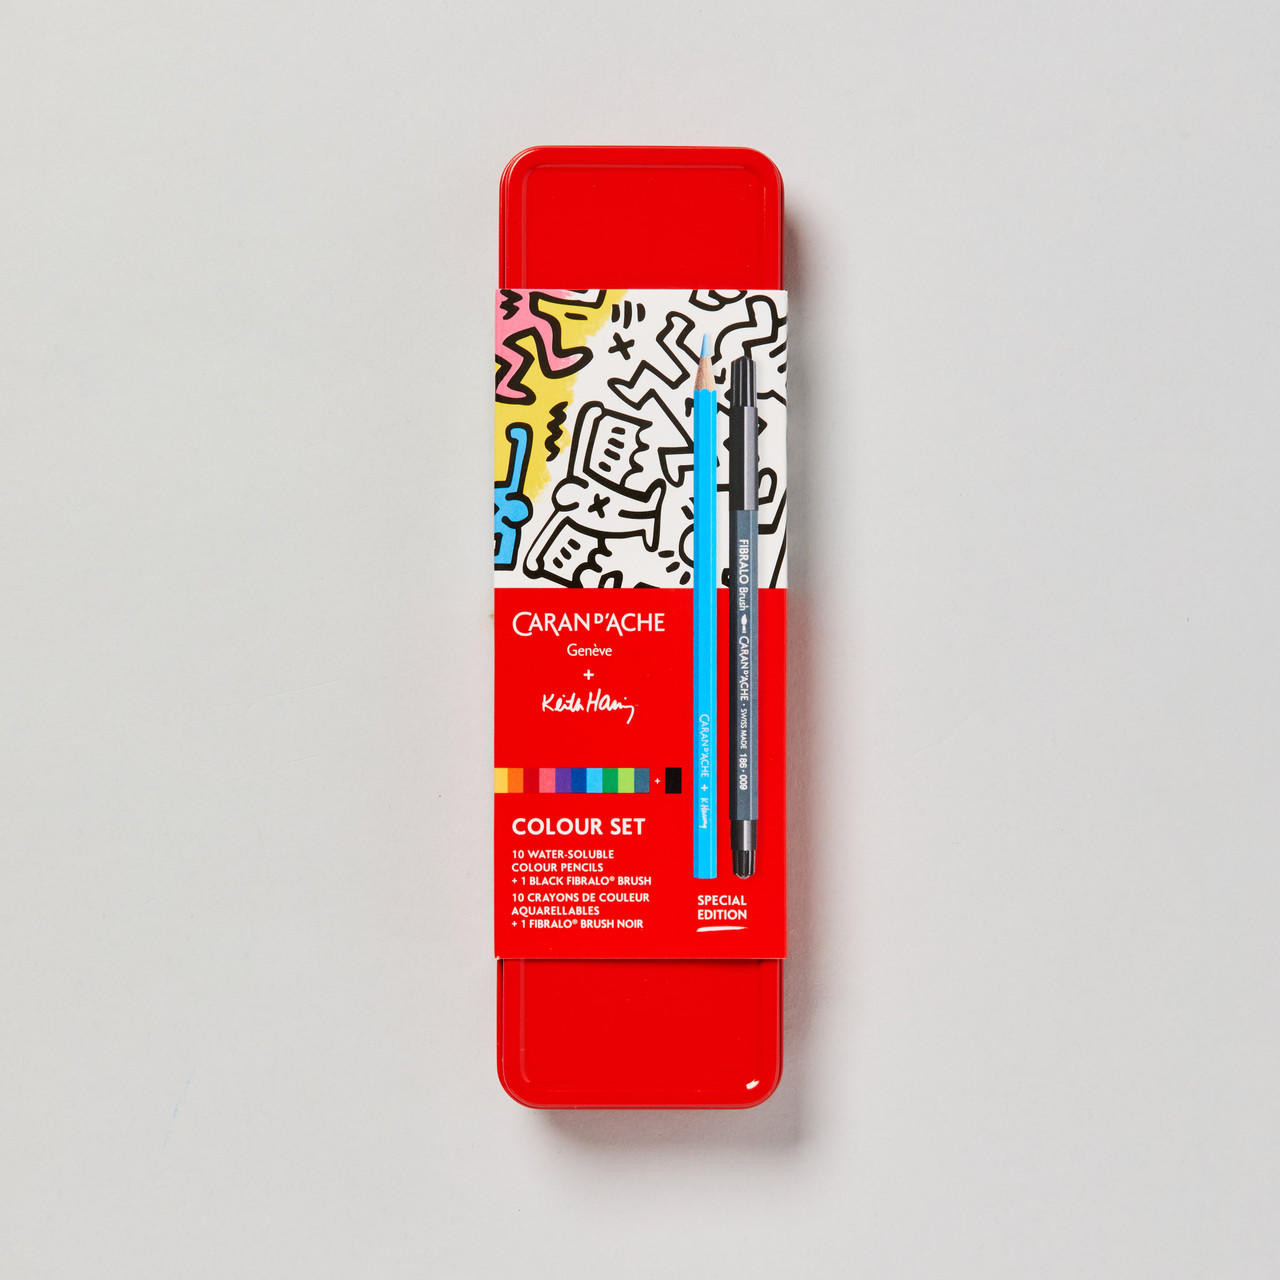 Caran d’Ache x Keith Haring Colour Pencils and Black Brush Pen Set of 11